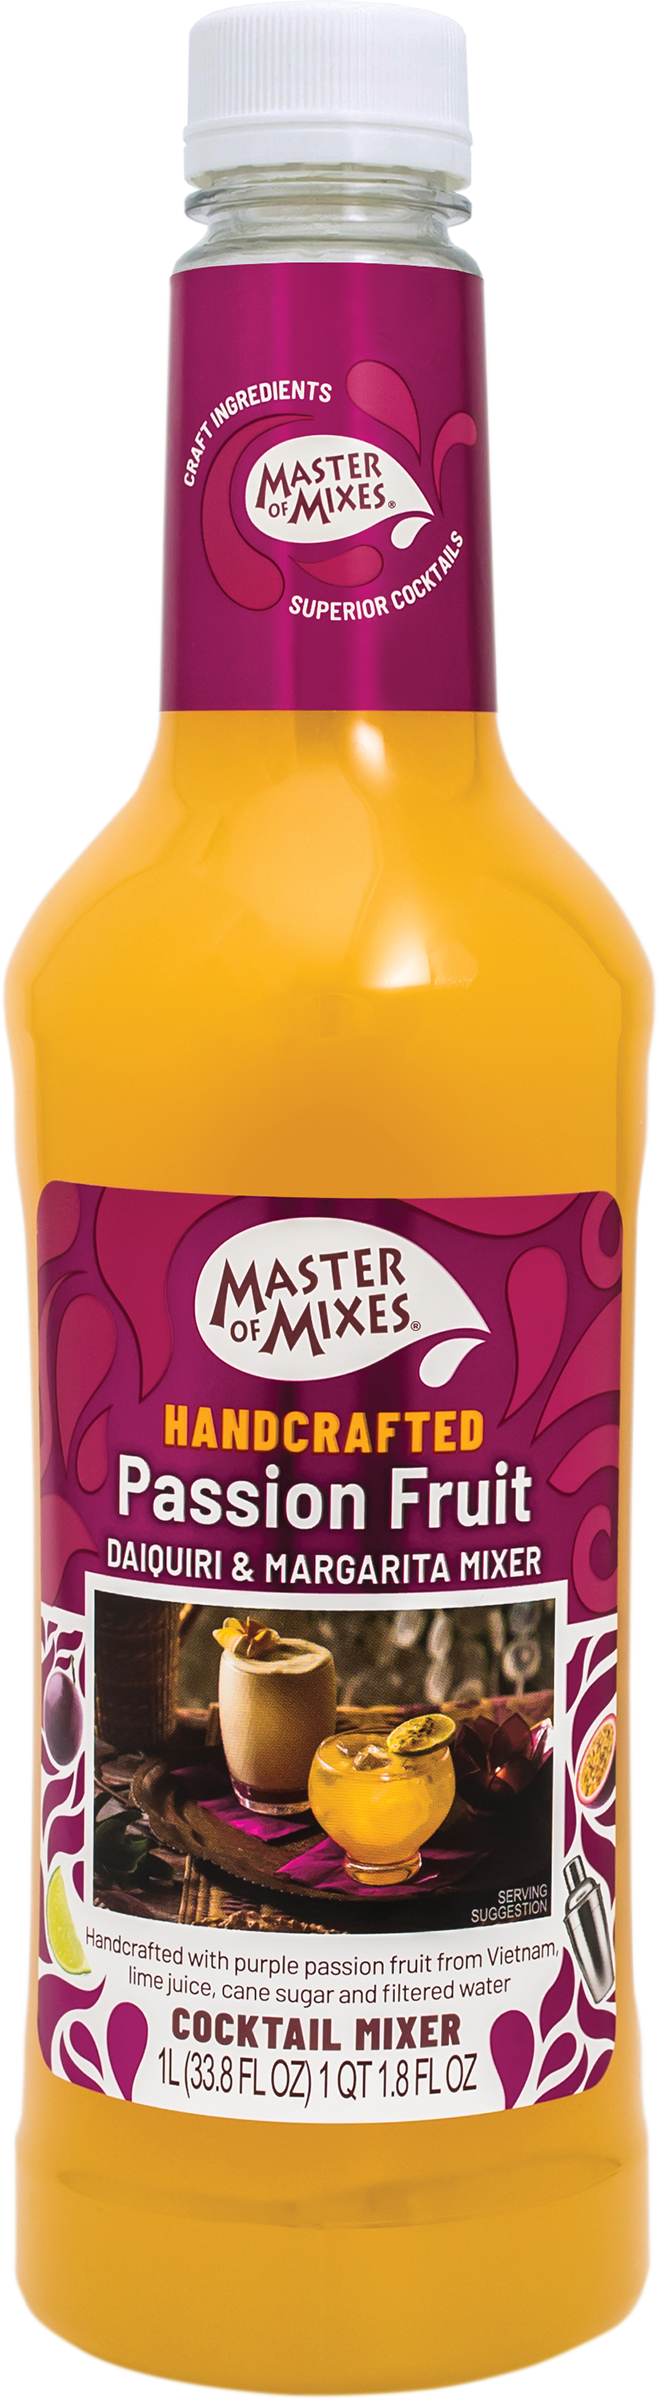 Master of Mixes Handcrafted 1L